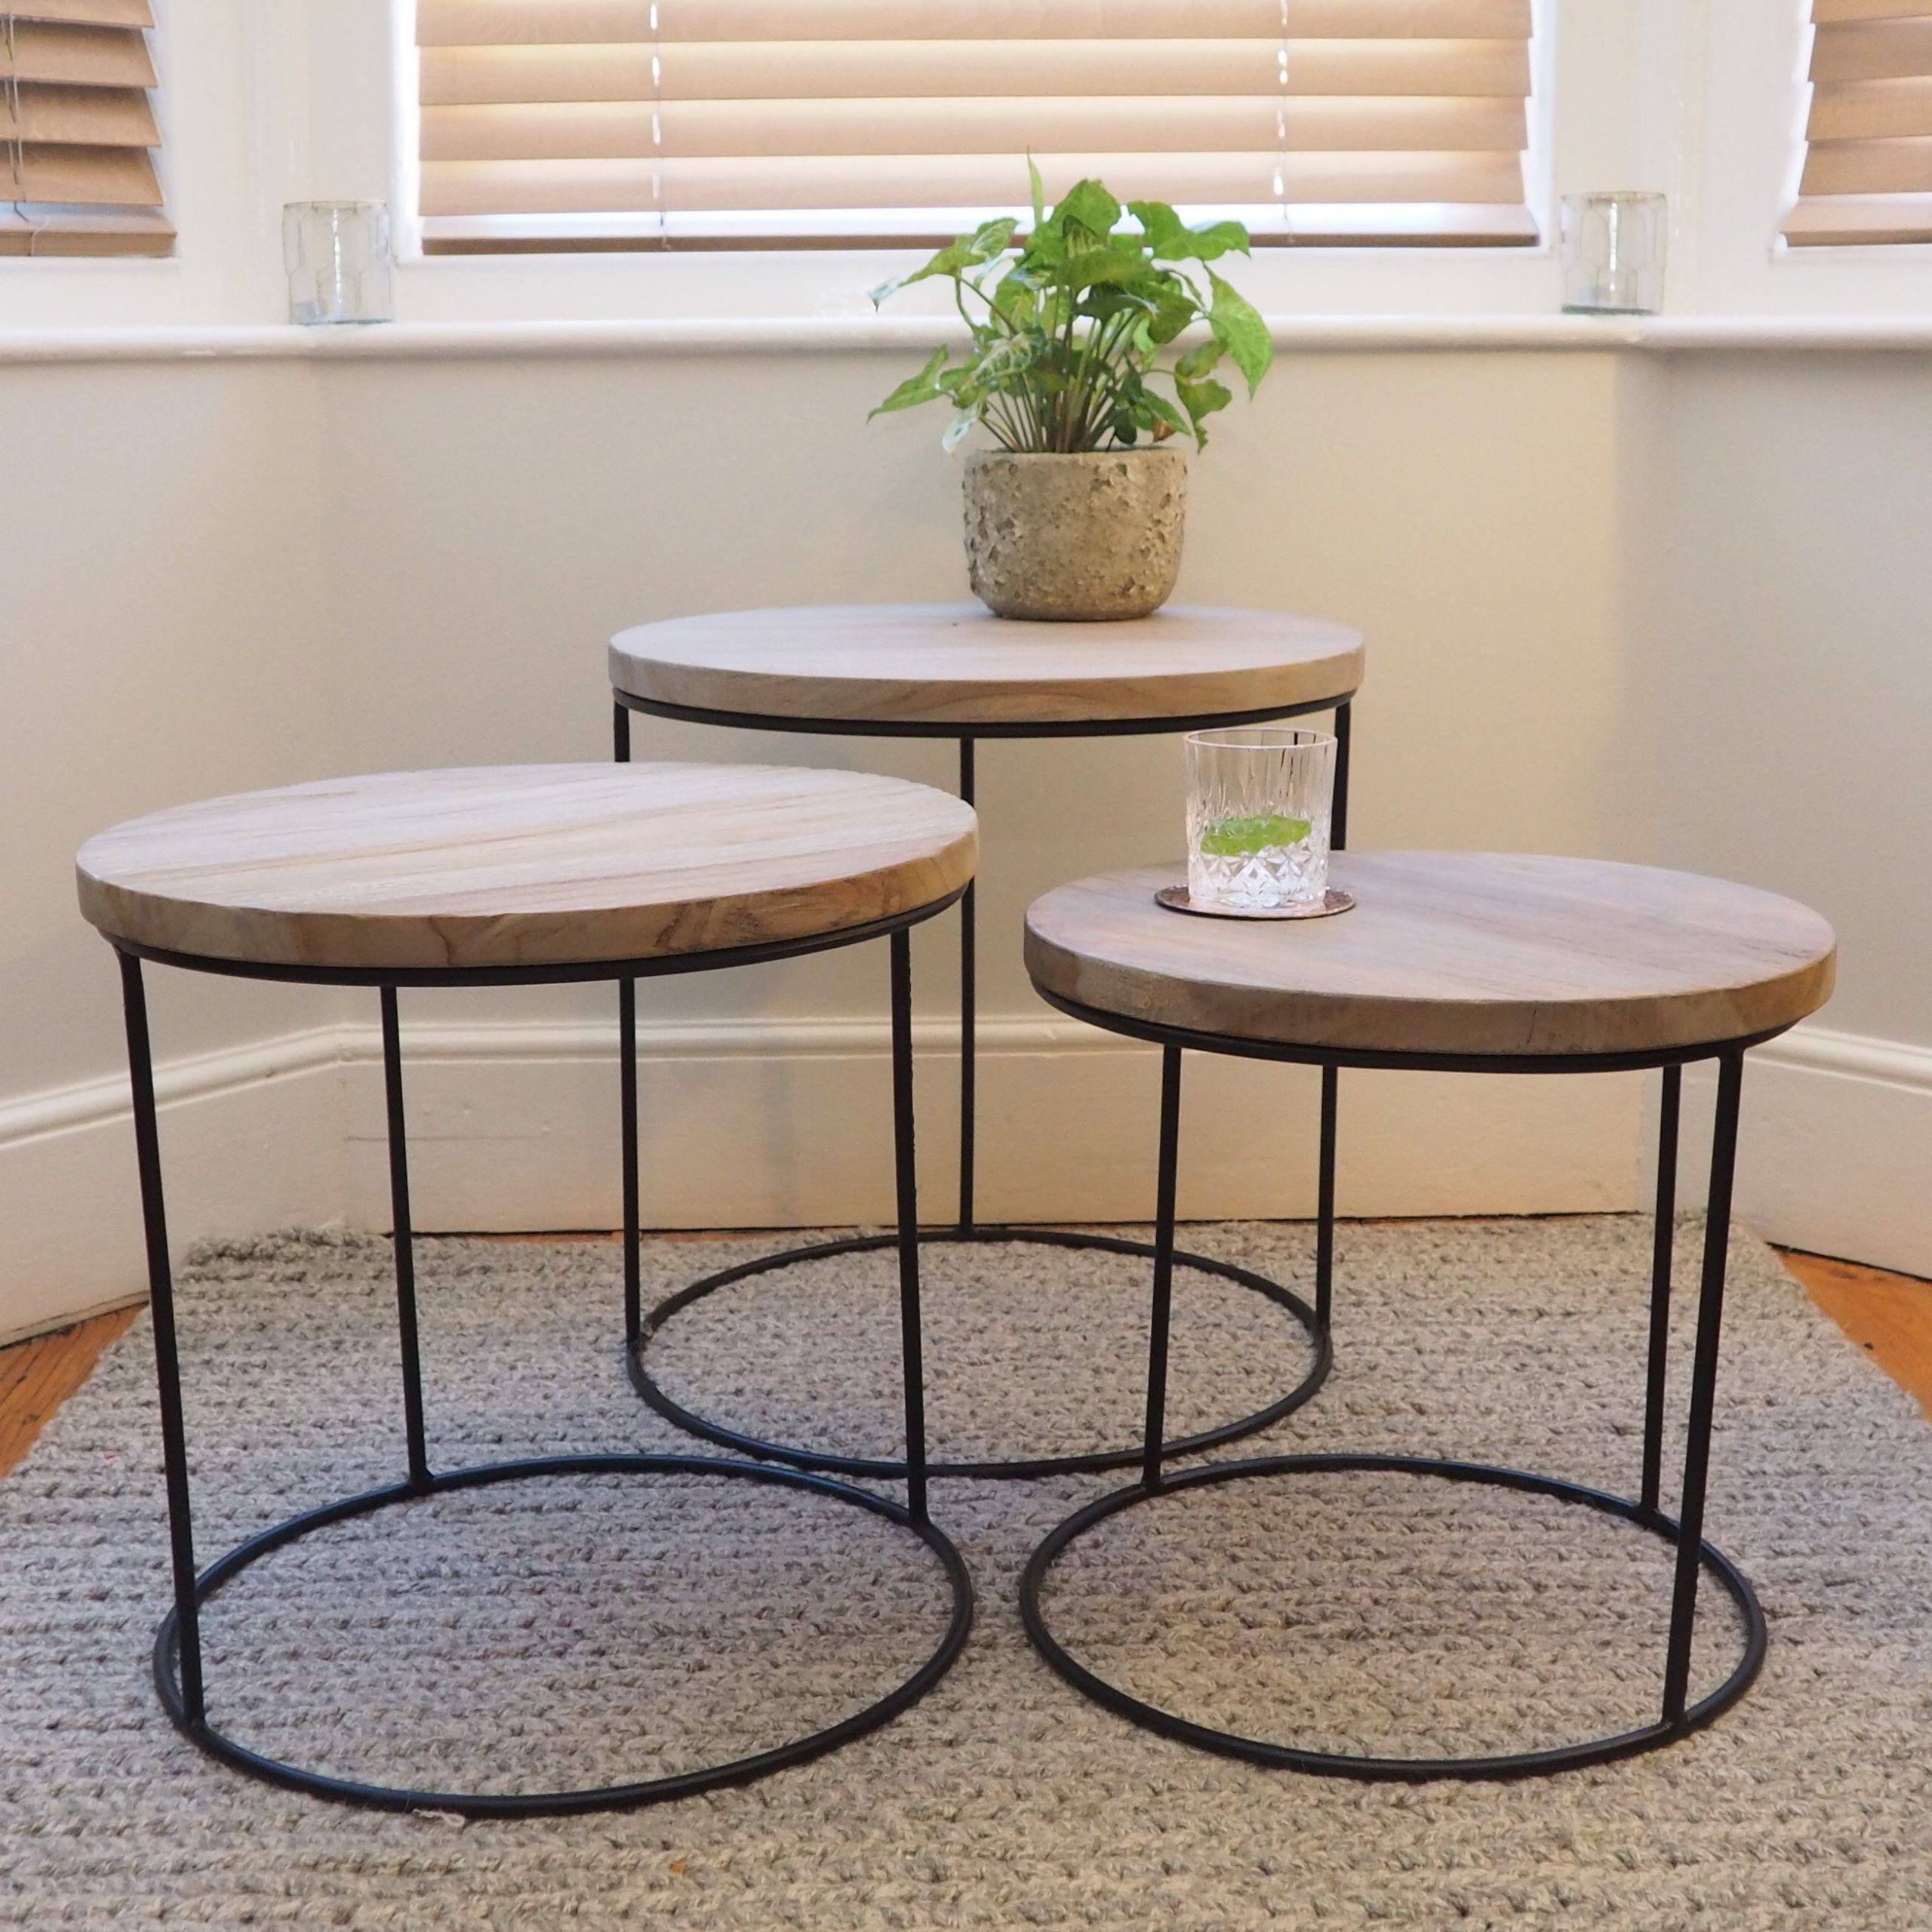 Round Nesting Tables – Za Za Homes | Nesting Tables Living Room Pertaining To Coffee Tables Of 3 Nesting Tables (Gallery 13 of 20)